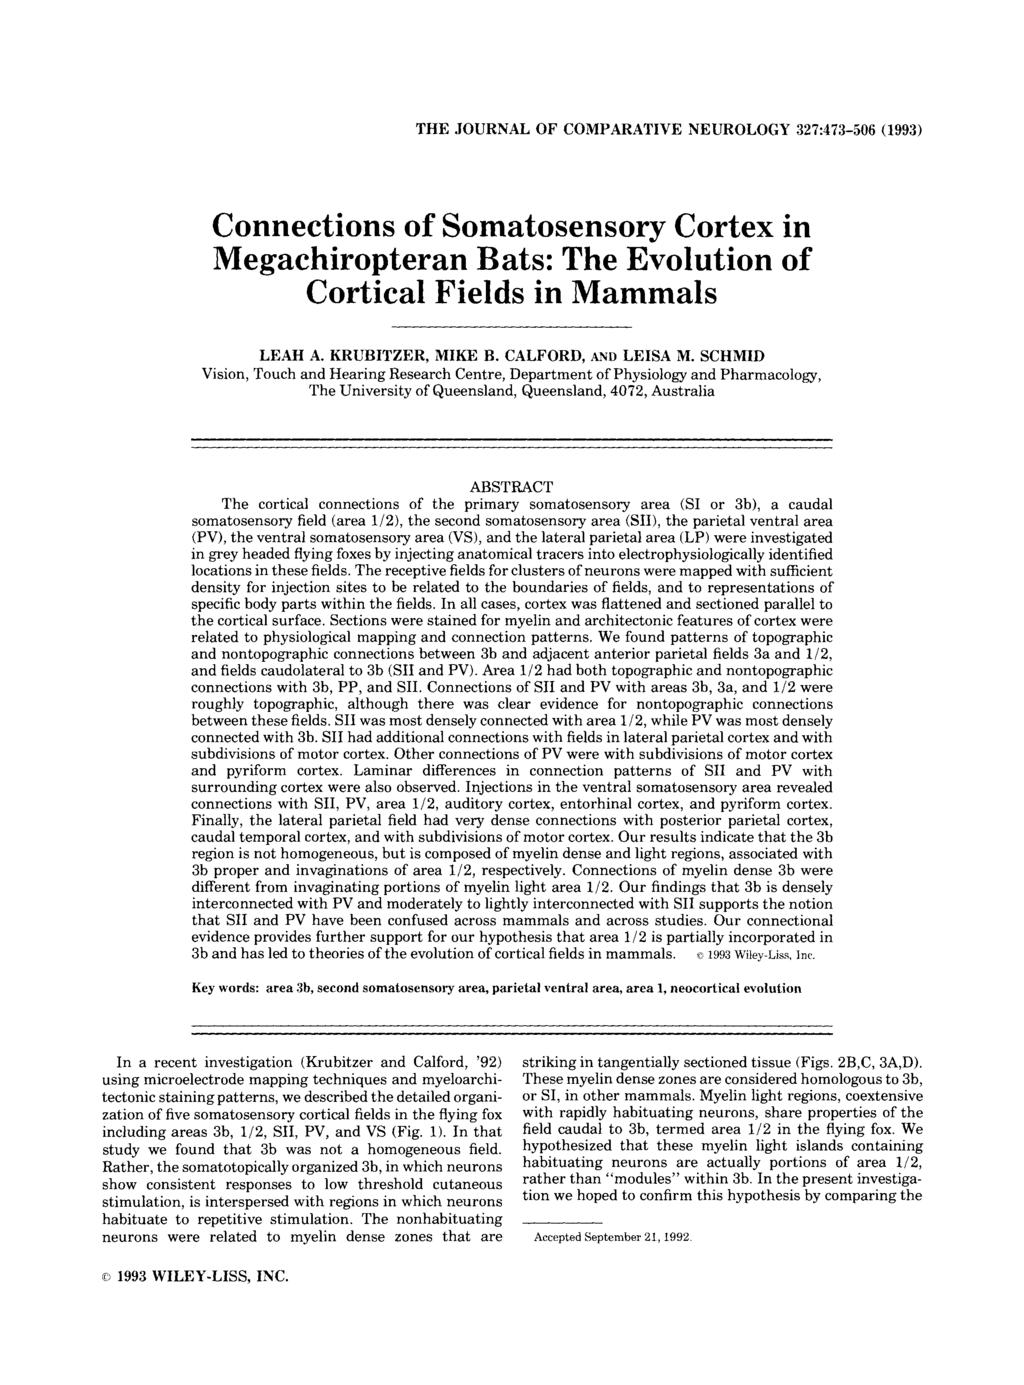 THE JOURNAL OF COMPARATIVE NEUROLOGY 327~473-506 (1993) Connections of Somatosensory Cortex in Megachiropteran Bats: The Evolution of Cortical Fields in Mammals LEAH A. KRUBITZER, MIKE B.